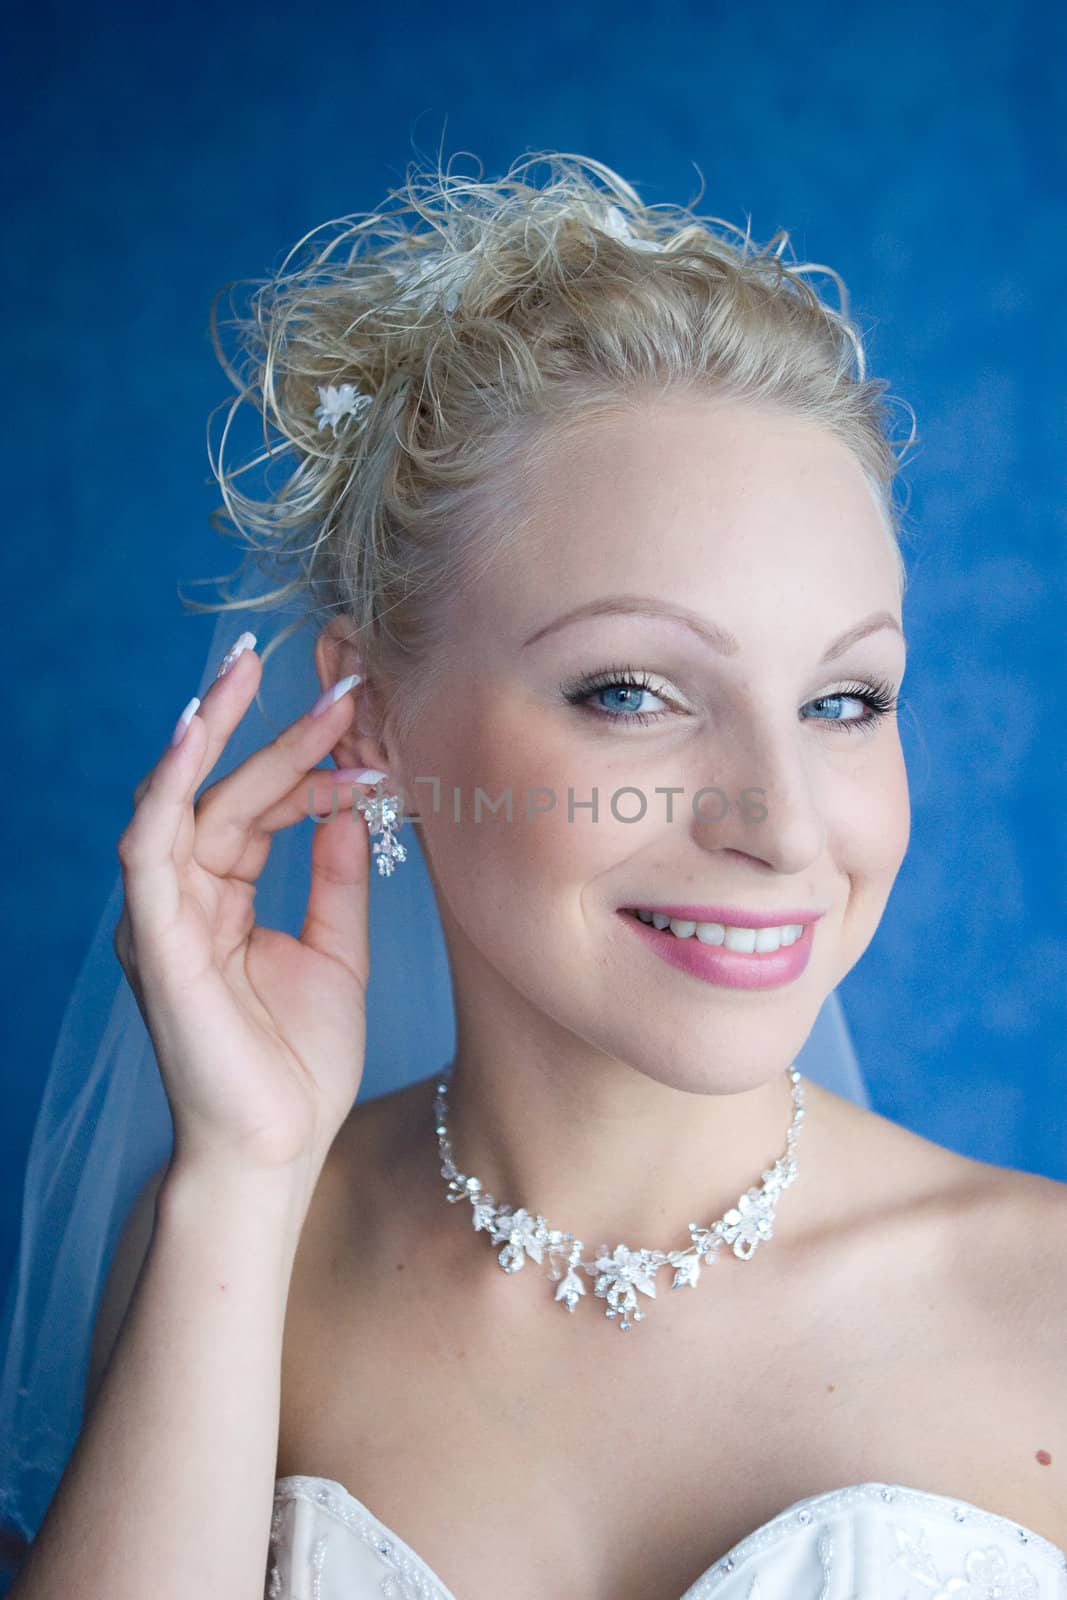 a smiling bride with an ear-ring by vsurkov